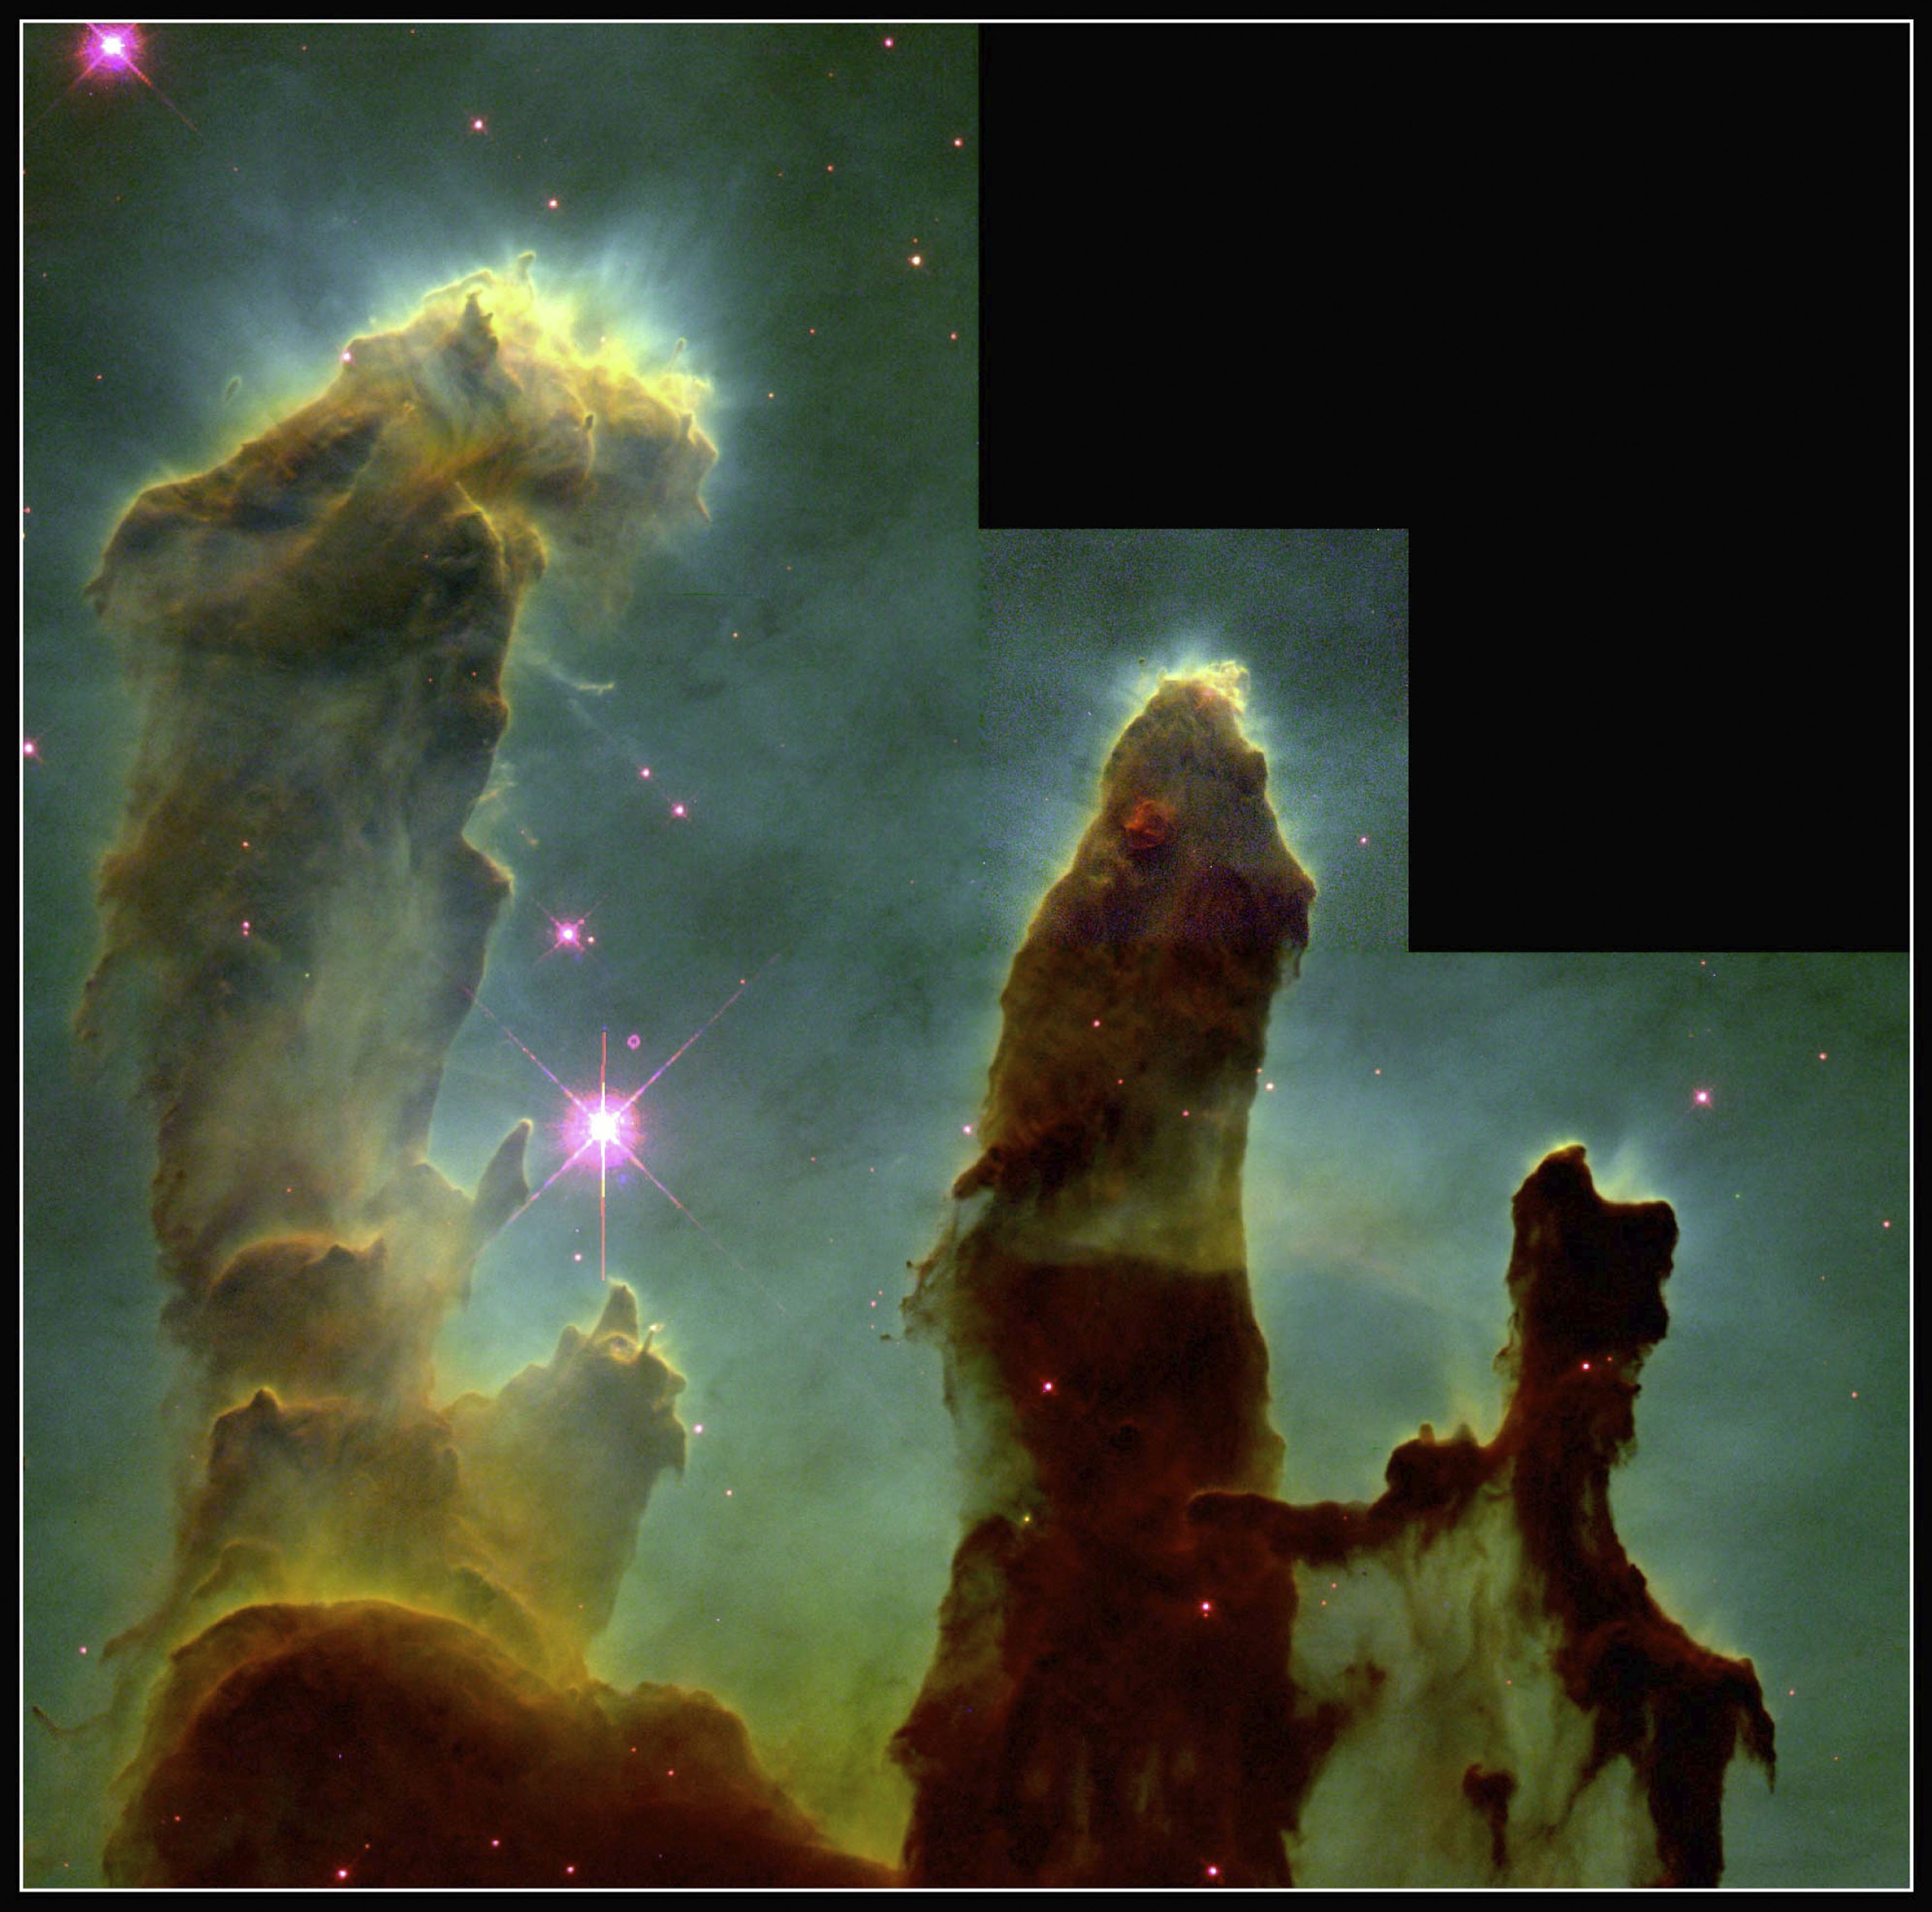 These eerie, dark pillar-like structures are columns of cool interstellar hydrogen gas and dust that are also incubators for new stars. The pillars protrude from the interior wall of a dark molecular cloud like stalagmites from the floor of a cavern. They are part of the Eagle Nebula and were captured by the Hubble telescope in 1995 (Science & Society Picture Library—SSPL via Getty Images)